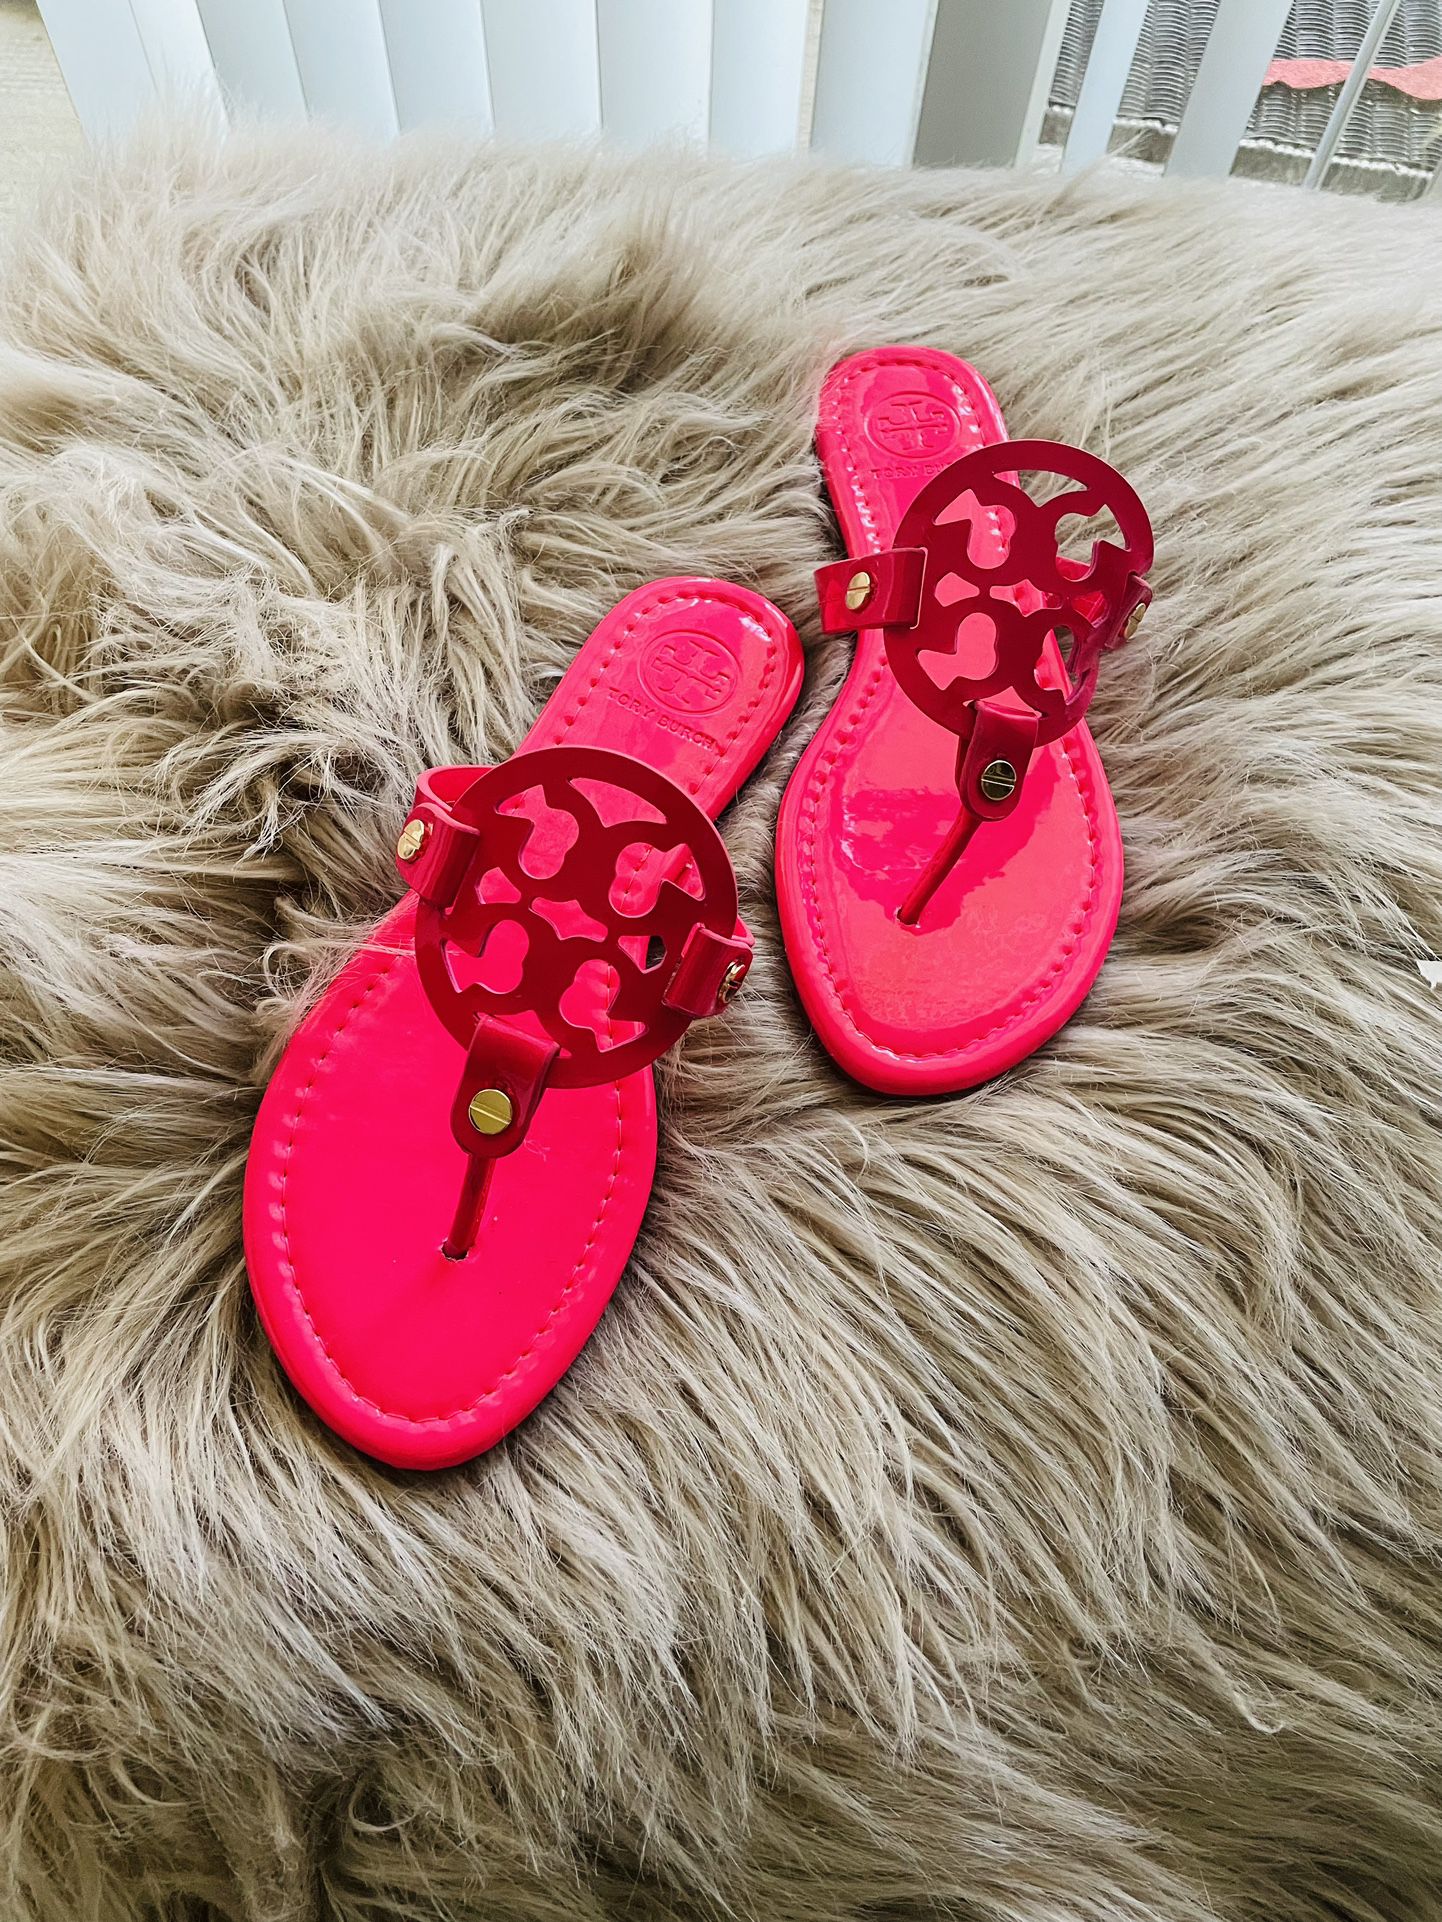 Tory Burch, Shoes, Tory Burch Miller Neon Pink Sandals